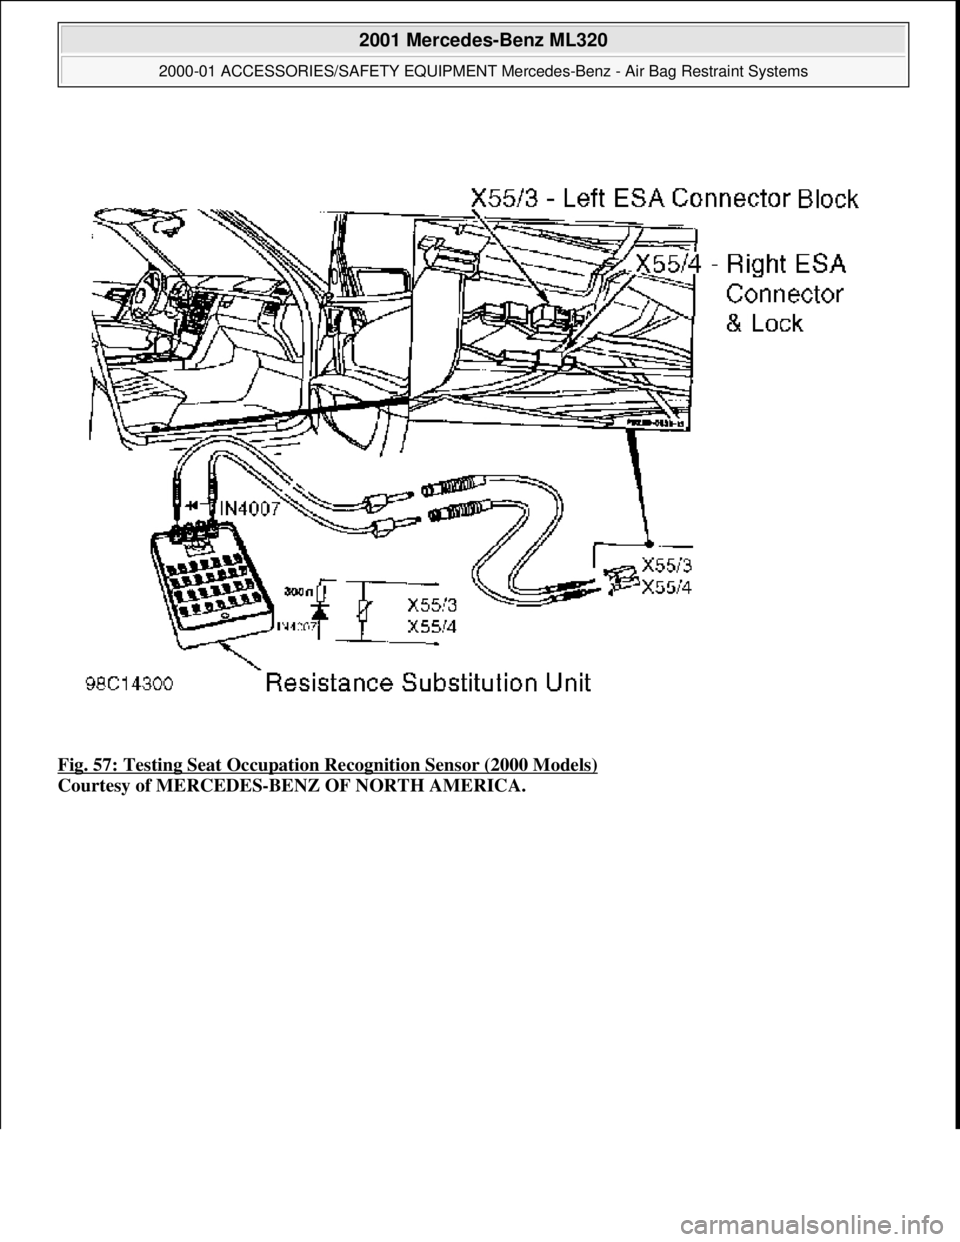 MERCEDES-BENZ ML500 1997  Complete Owners Manual Fig. 57: Testing Seat Occupation  Recognition Sensor (2000 Models)  
Courtesy of MERCEDES-BENZ OF NORTH AMERICA.
 
2001 Mercedes-Benz ML320 
2000-01 ACCESSORIES/SAFETY EQUIPMENT Merc  edes-Benz - Air 